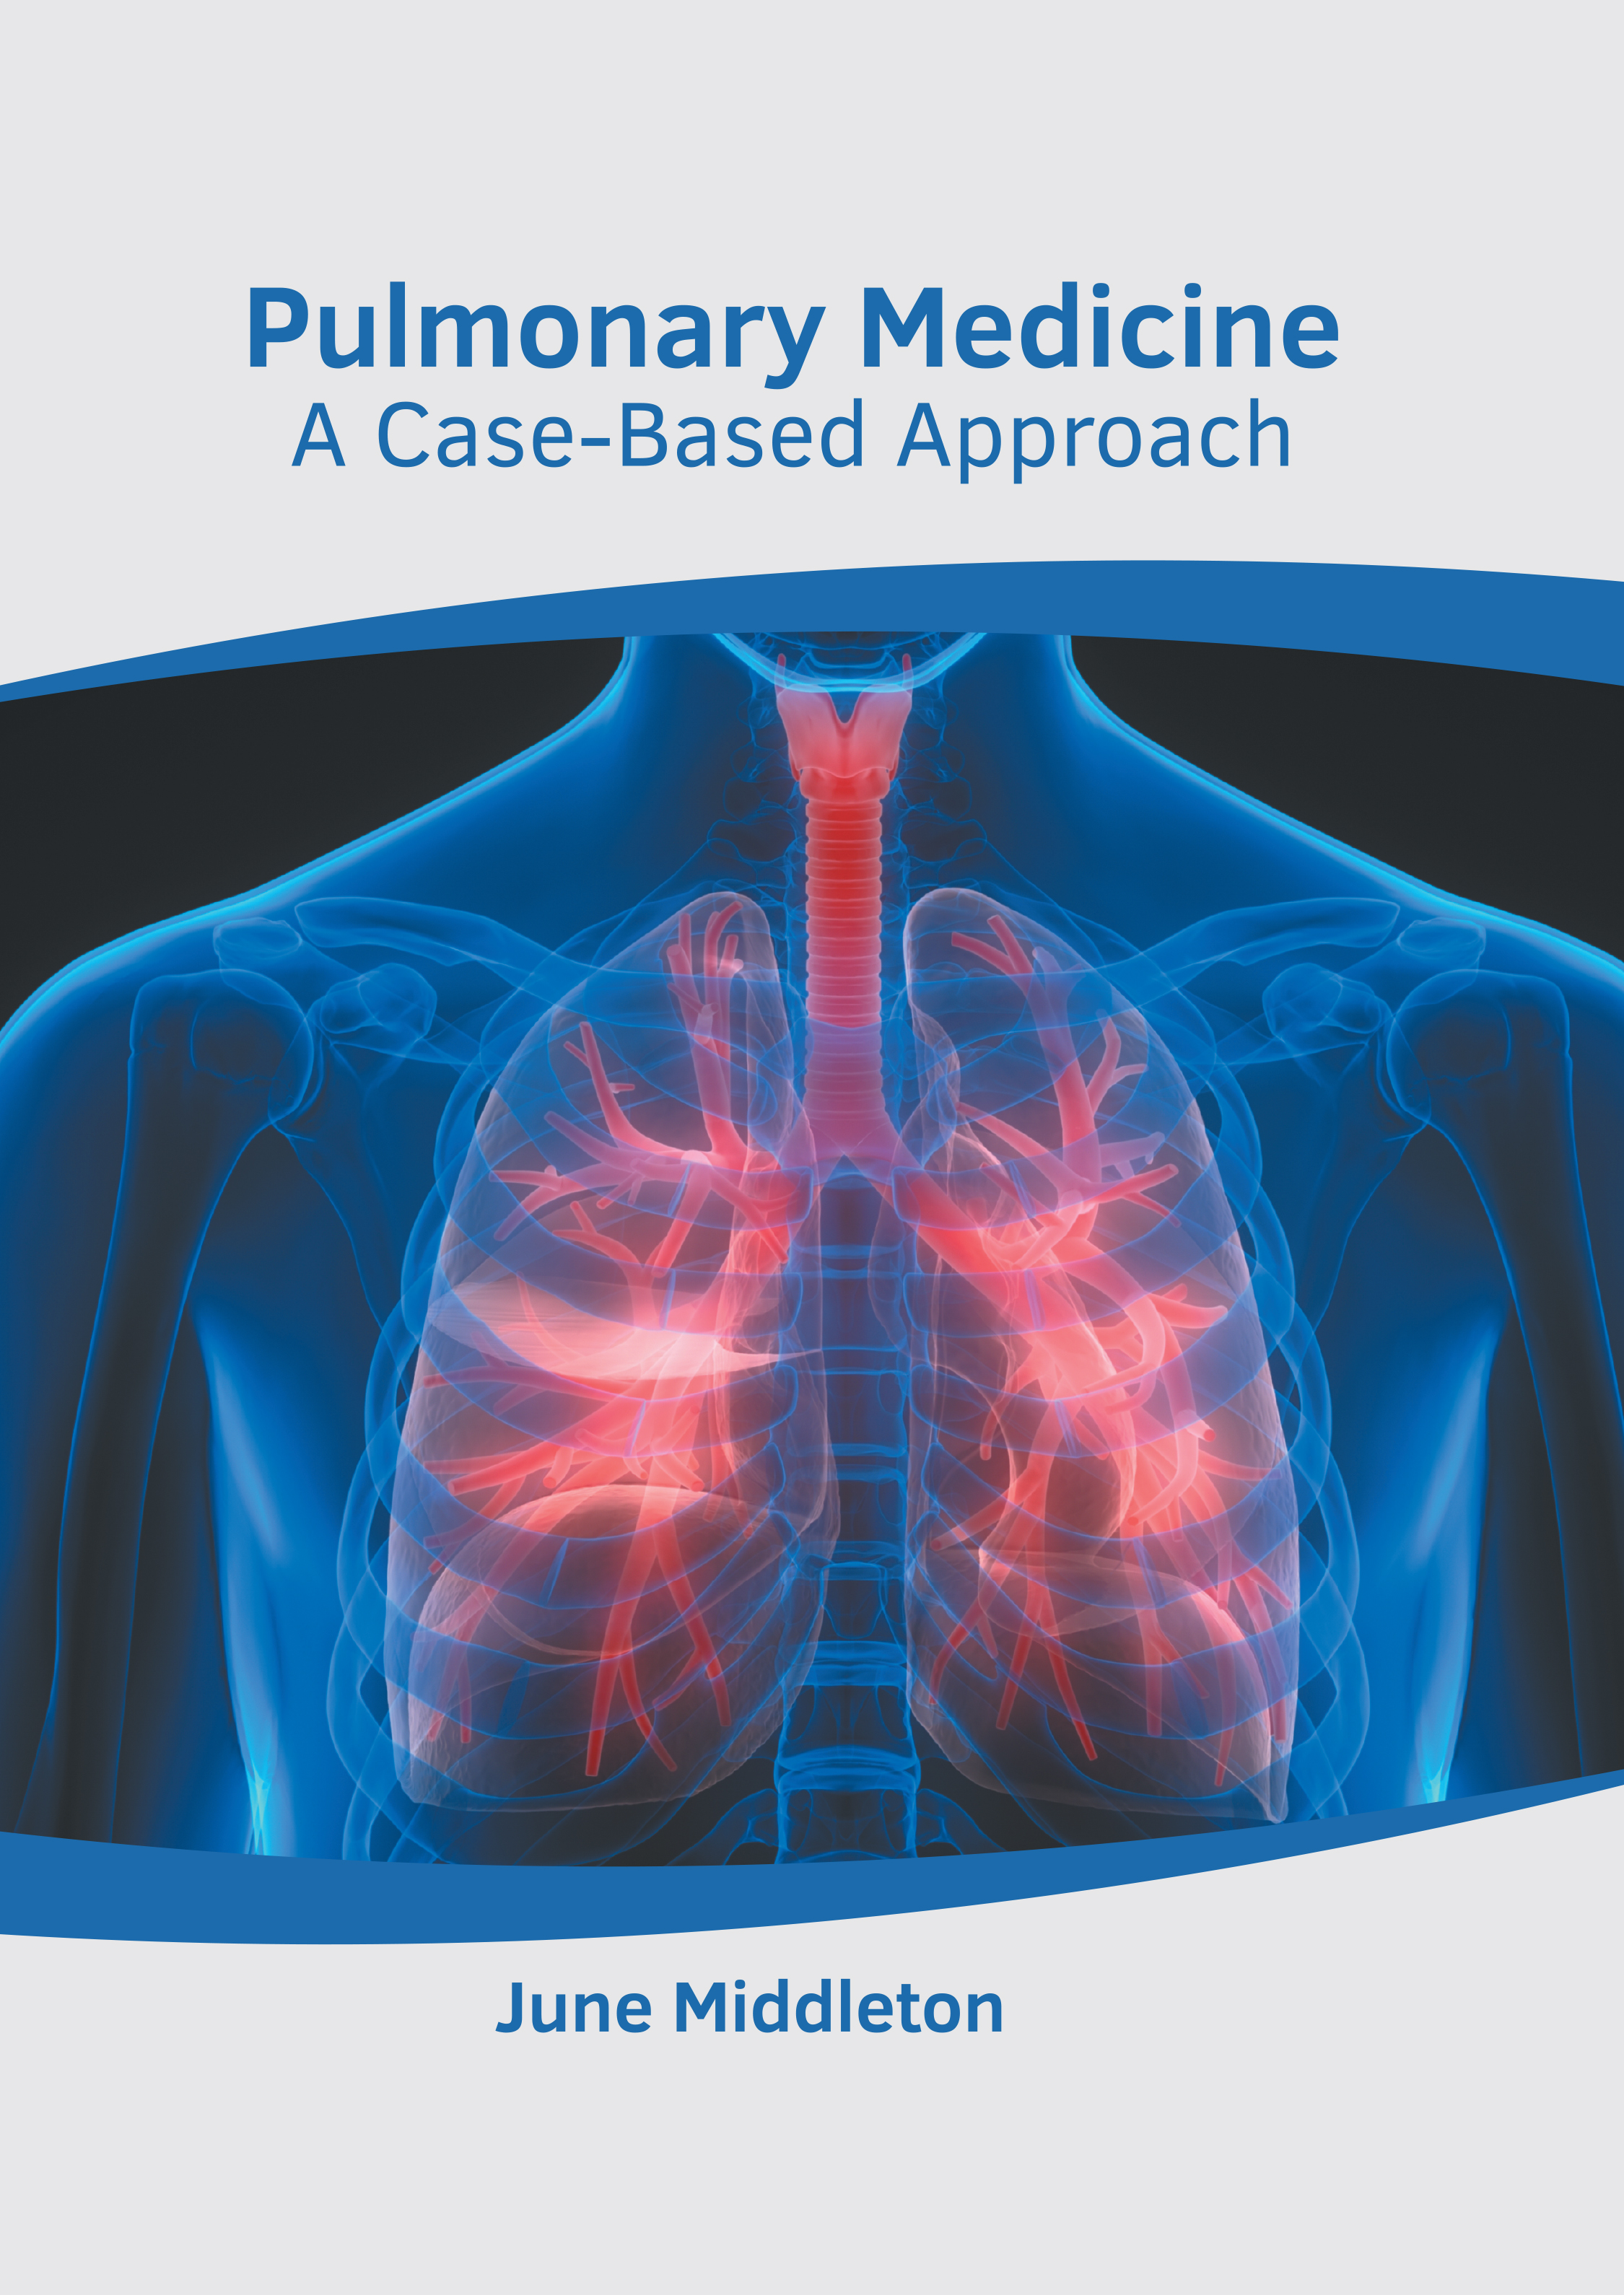 

exclusive-publishers/american-medical-publishers/pulmonary-medicine-a-case-based-approach-9781639274642